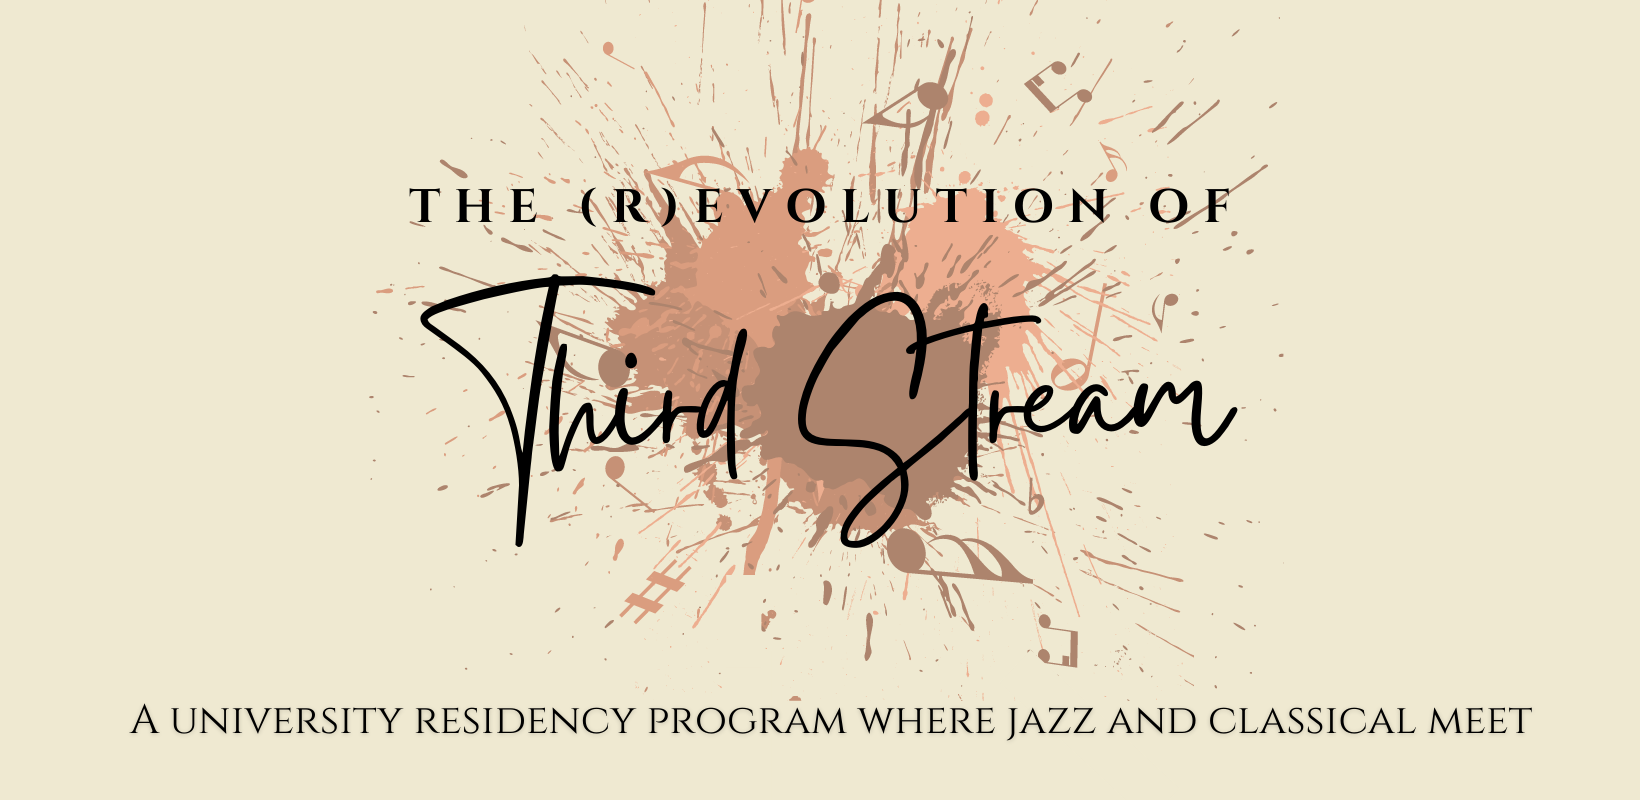 A university residency program where jazz and classical meet